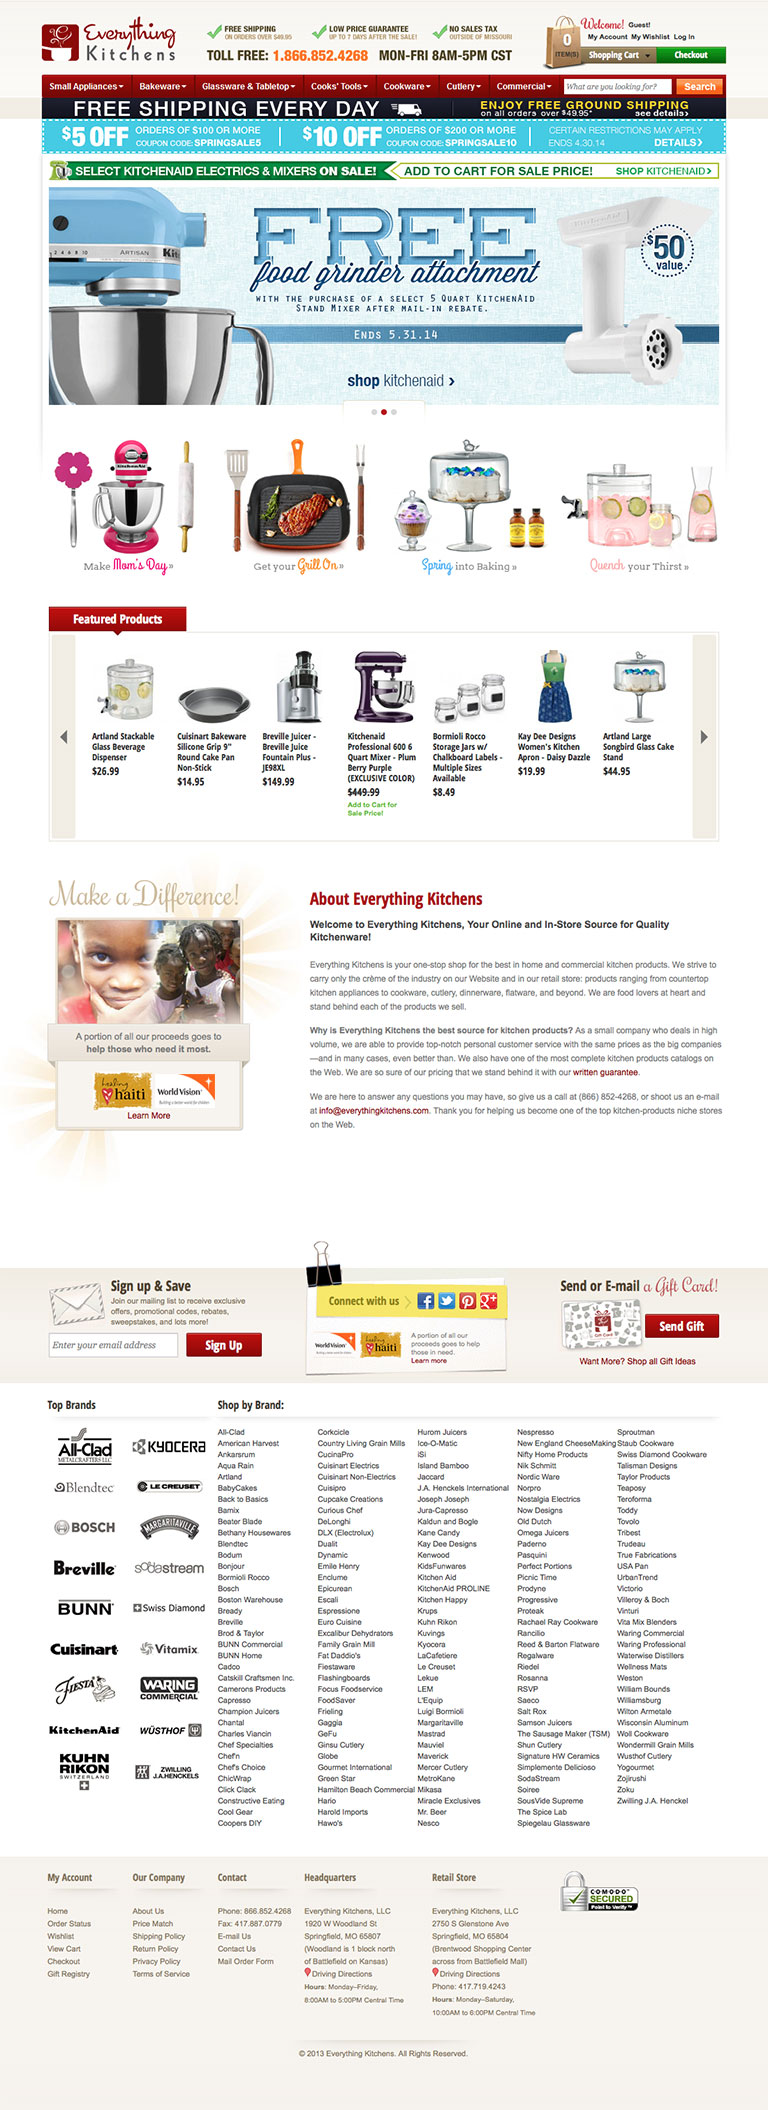 Everything Kitchens Home Page Screenshot